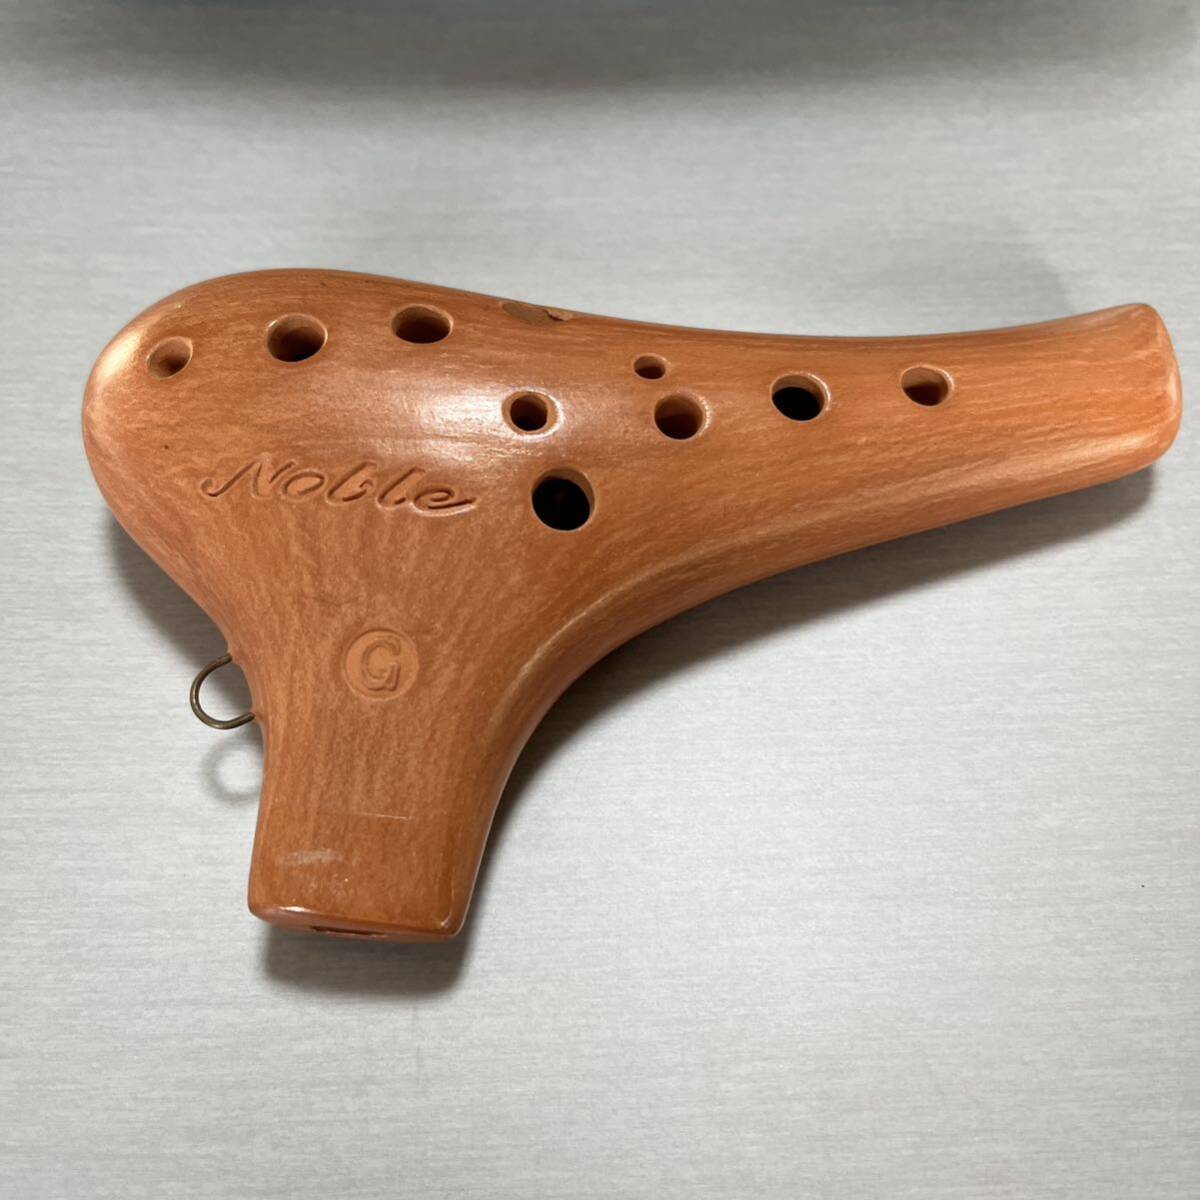  noble Noble ocarina soprano G SG noble. exclusive use soft case attaching 